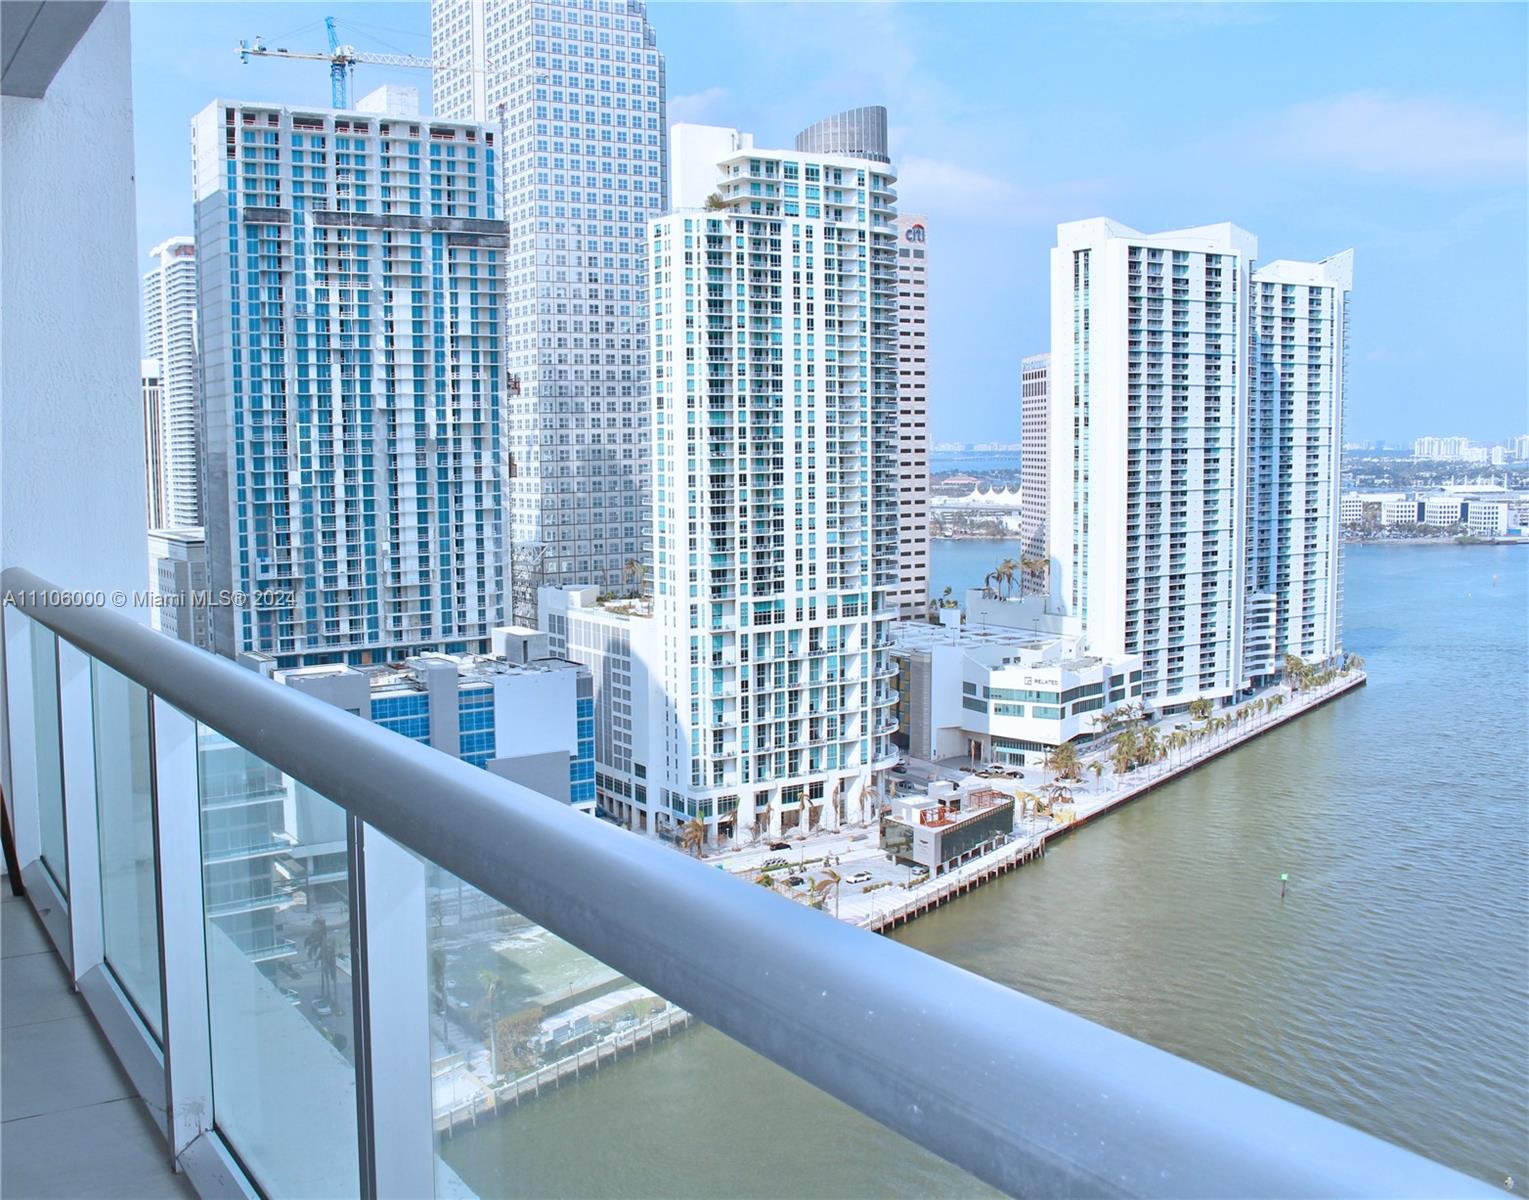 Beautiful 2/2 corner apartment with spectacular ocean views, luxury finishes and fully furnished. Subzero and Miele appliances. 
Enjoy being in the heart of Miami and having restaurants like Cipriani and Cantina La Veinte within ICON and many more at walking distance. Go shopping at Brickell City Center and do groceries walking because everything is so close. 
Enjoy the weather and take a leisurely walk along the bay or party. All at walking distance.


*****The apartment is available for MONTHLY RENTALS*****